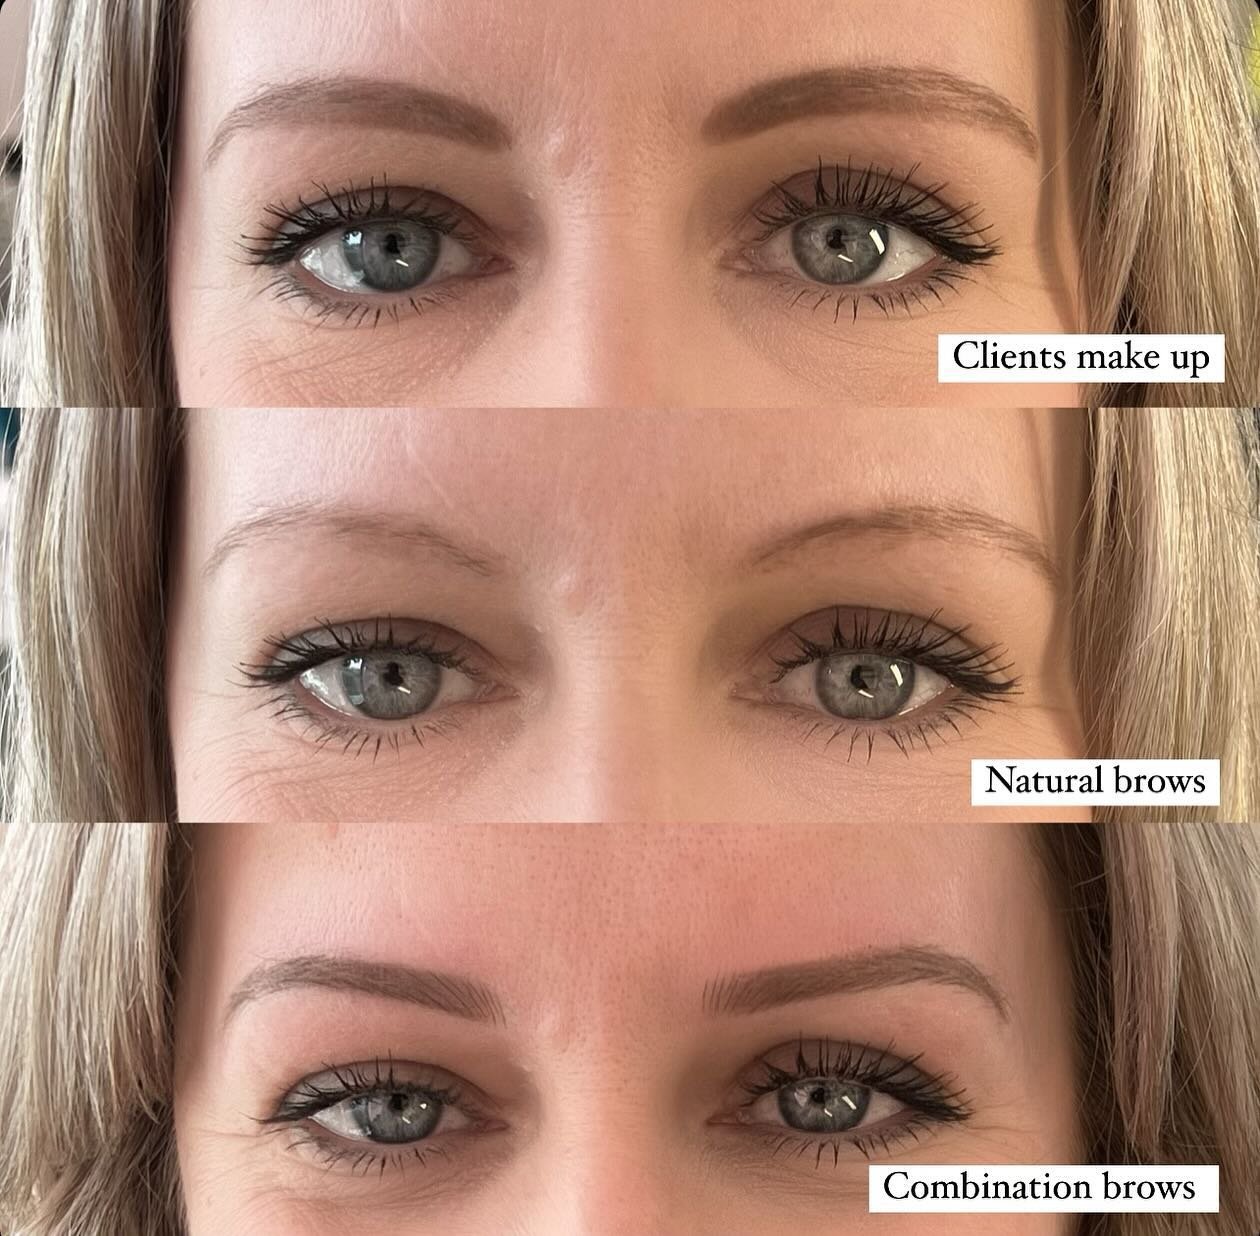 Louise came to me because she didn&rsquo;t have much natural brow hair, and she found creating an even shape and natural look with makeup everyday a bit of a struggle.

The thing that she was most excited about was the time that she would save in the